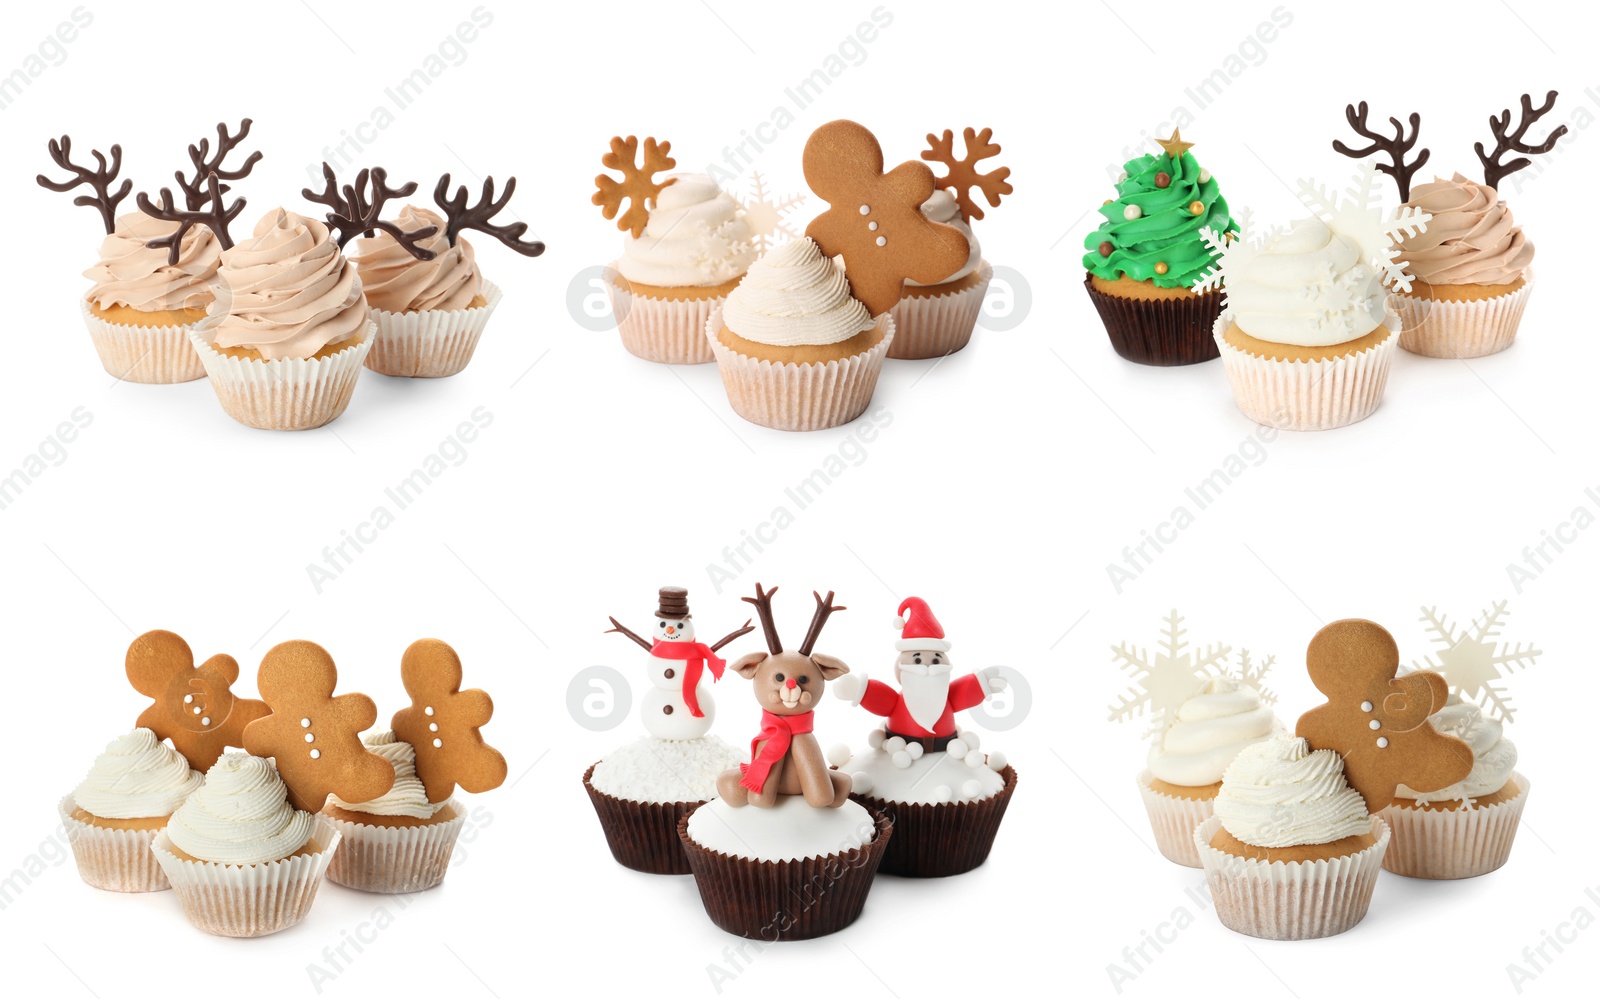 Image of Tasty cupcakes with Christmas decor on white background, collage